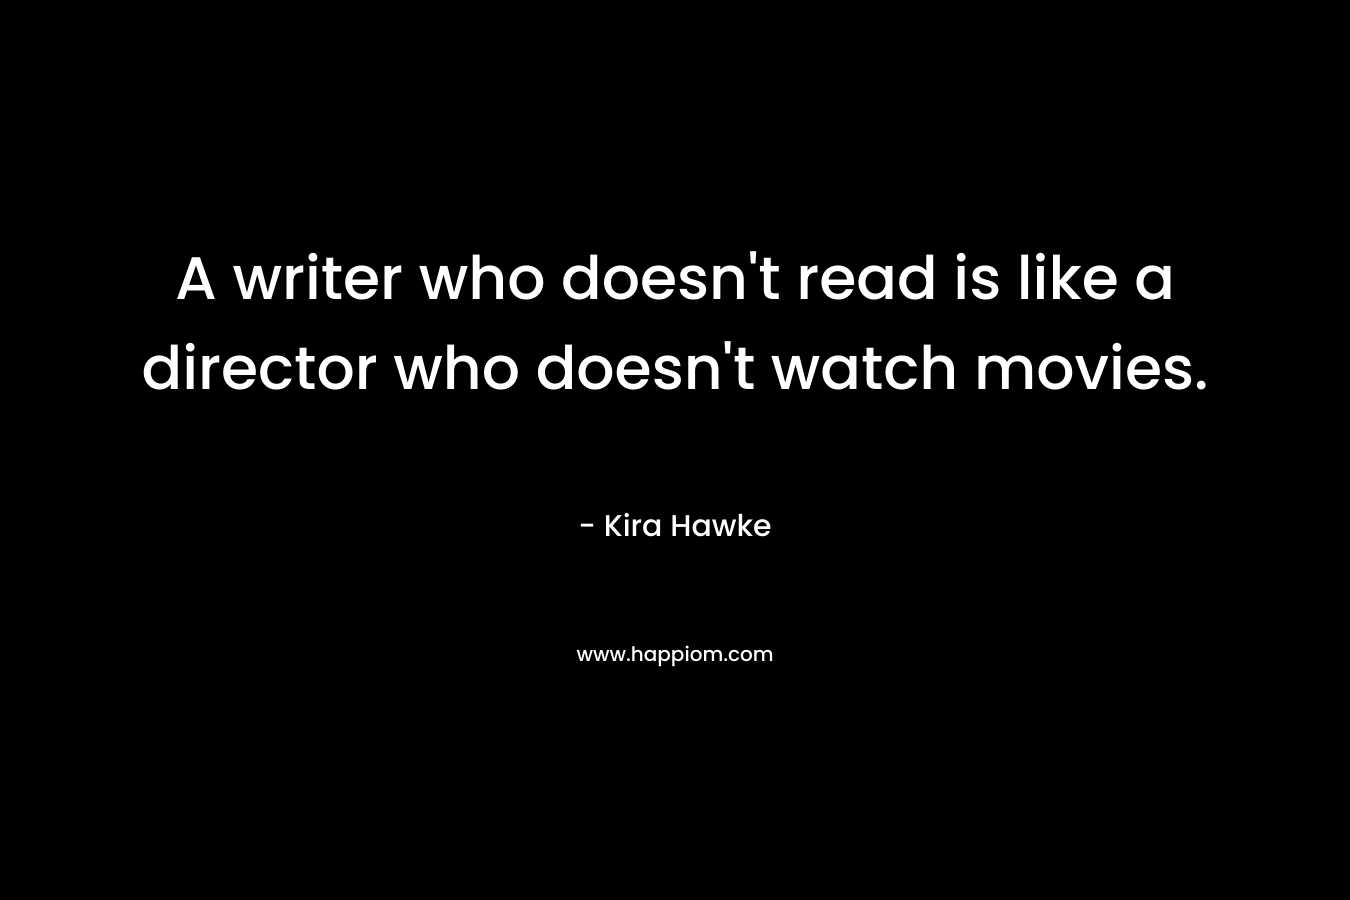 A writer who doesn't read is like a director who doesn't watch movies.